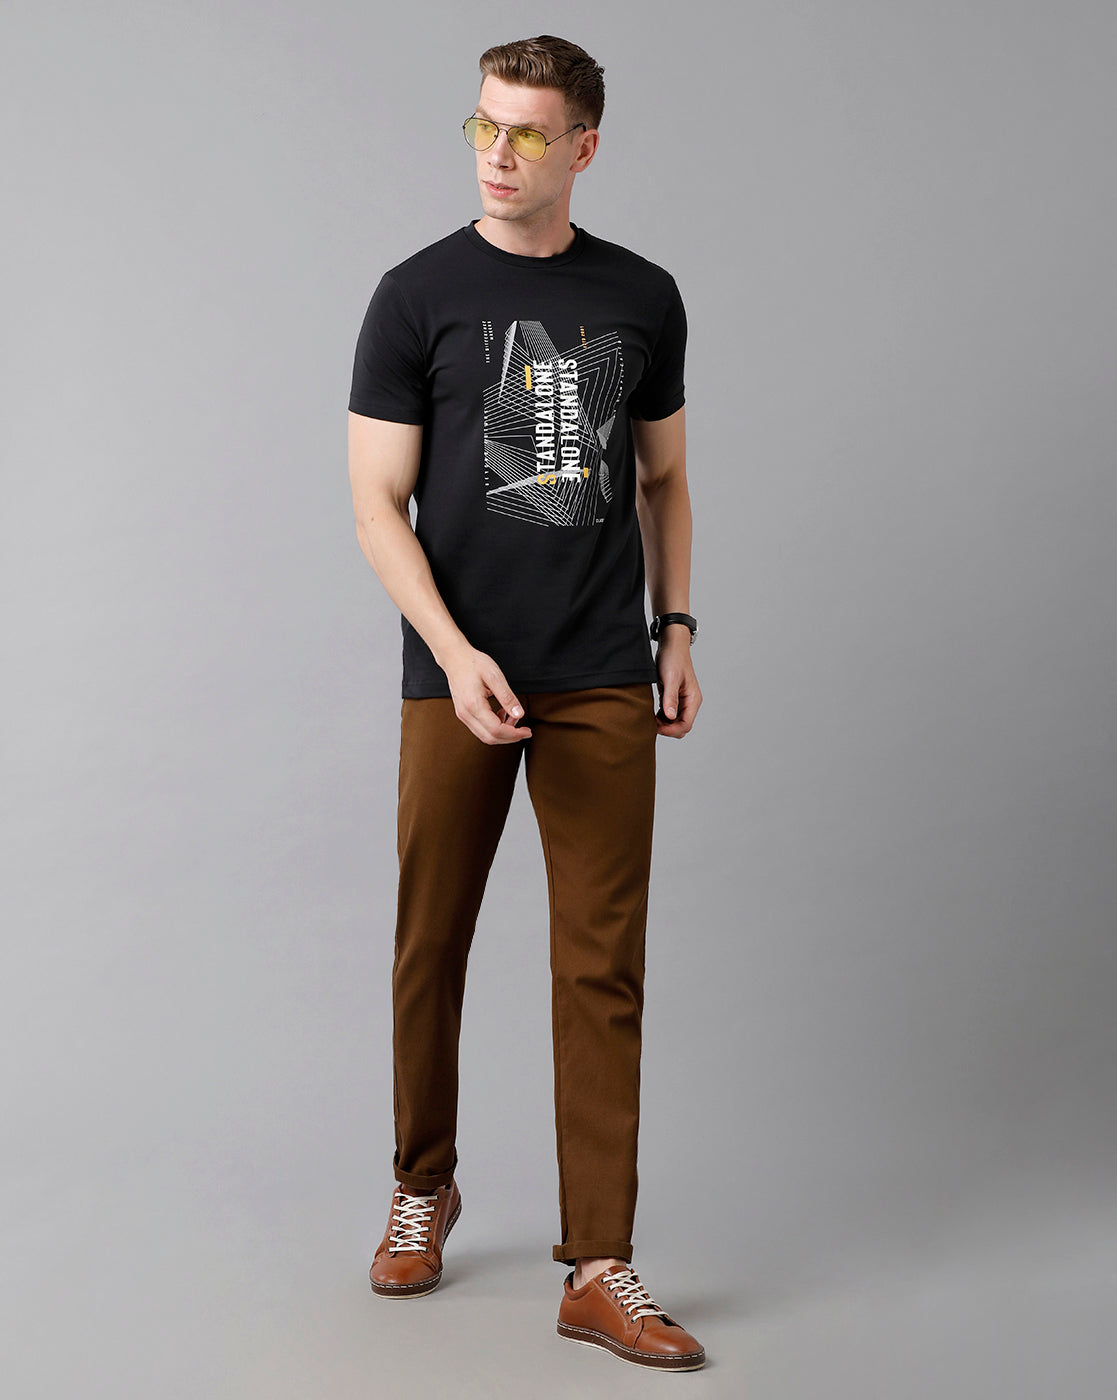 Classic Polo Men's Cotton Solid Slim Fit Brown Color Trousers | Tn2-08 B